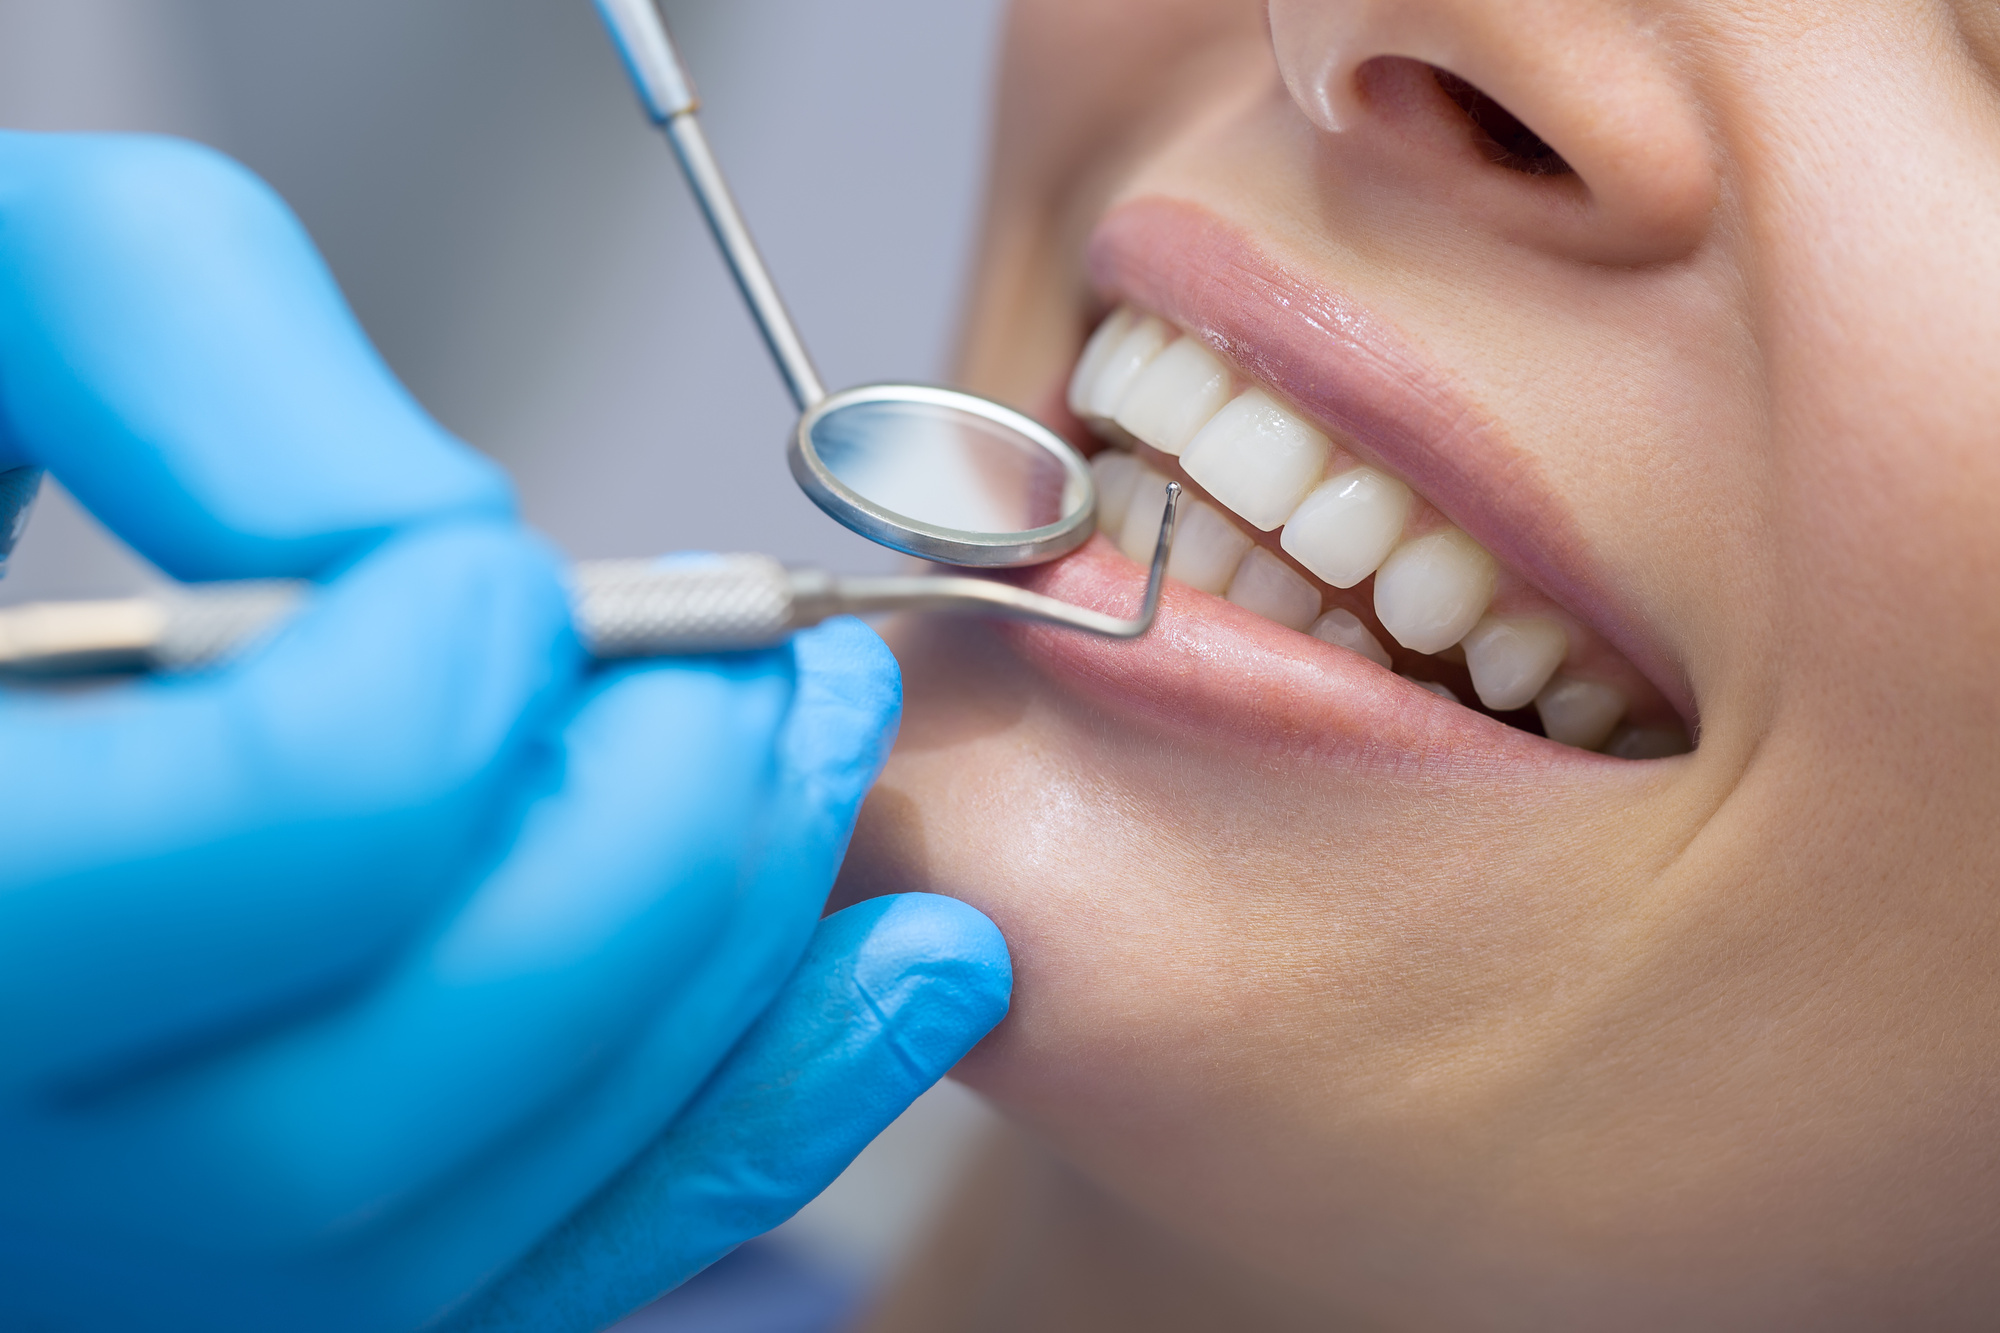 How To Tell If You Have A Cavity The Warning Signs Explained